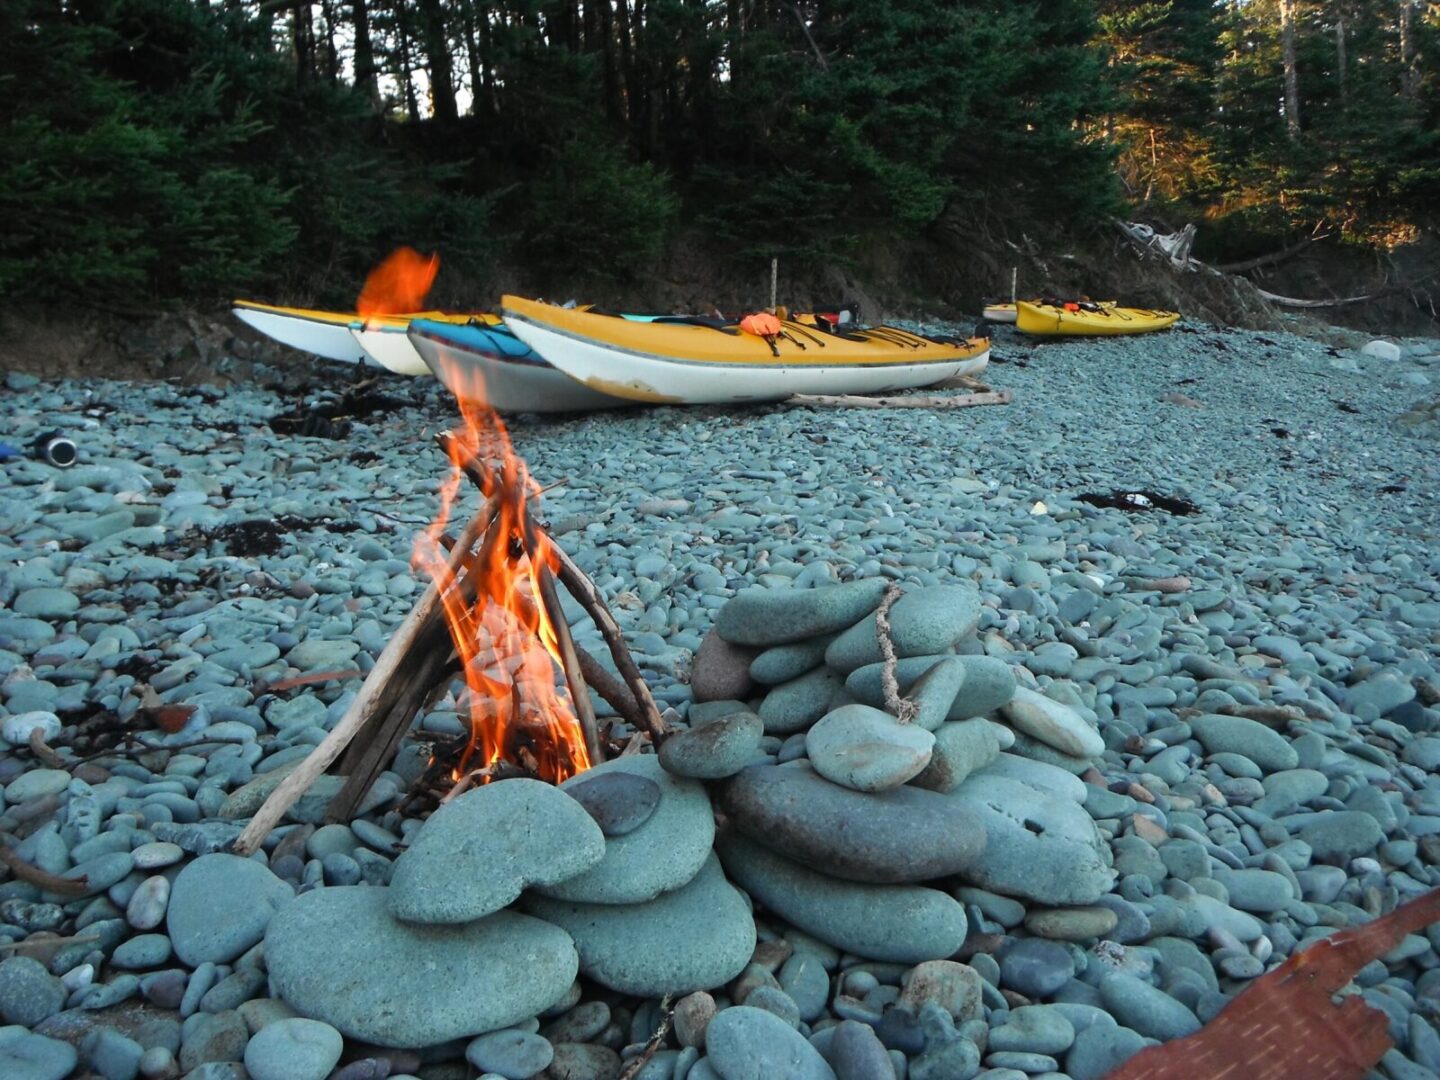 A campfire on a beach with kayaks in the background.